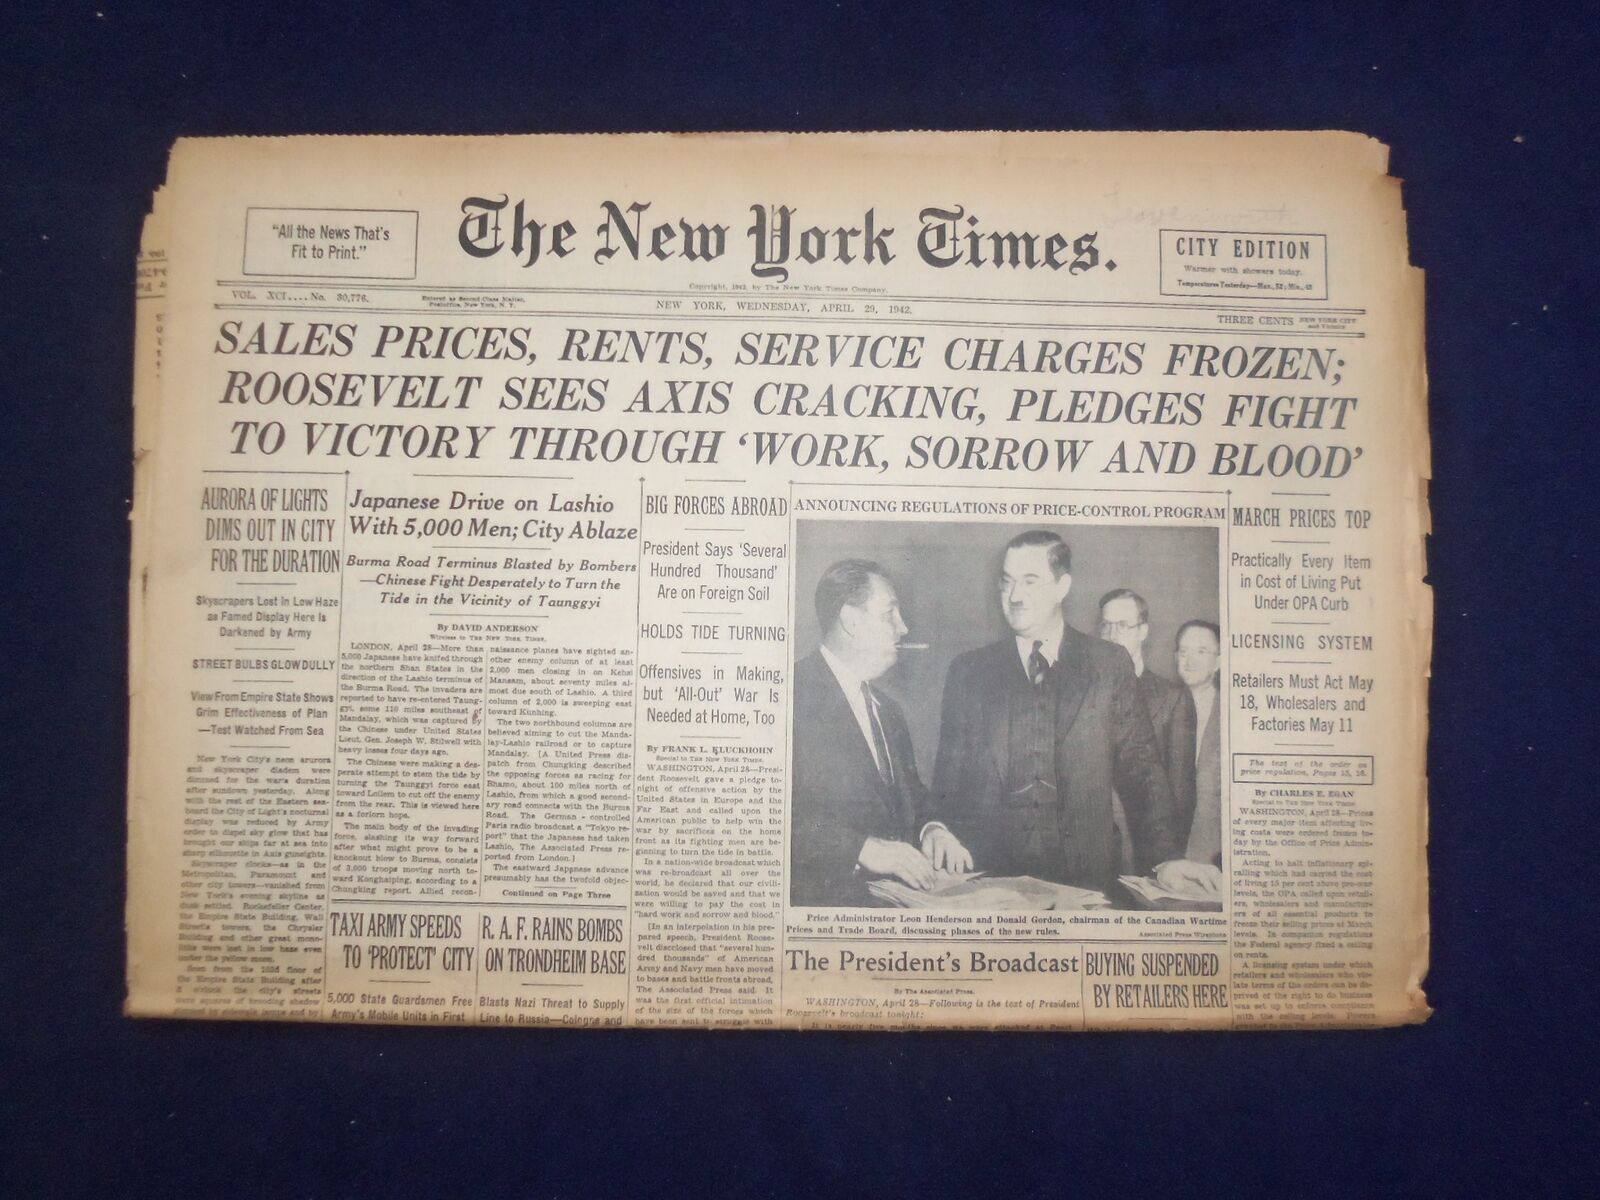 1943 APR 29 NEW YORK TIMES -SALES PRICES, RENTS, SERVICE CHARGES FROZEN- NP 6533